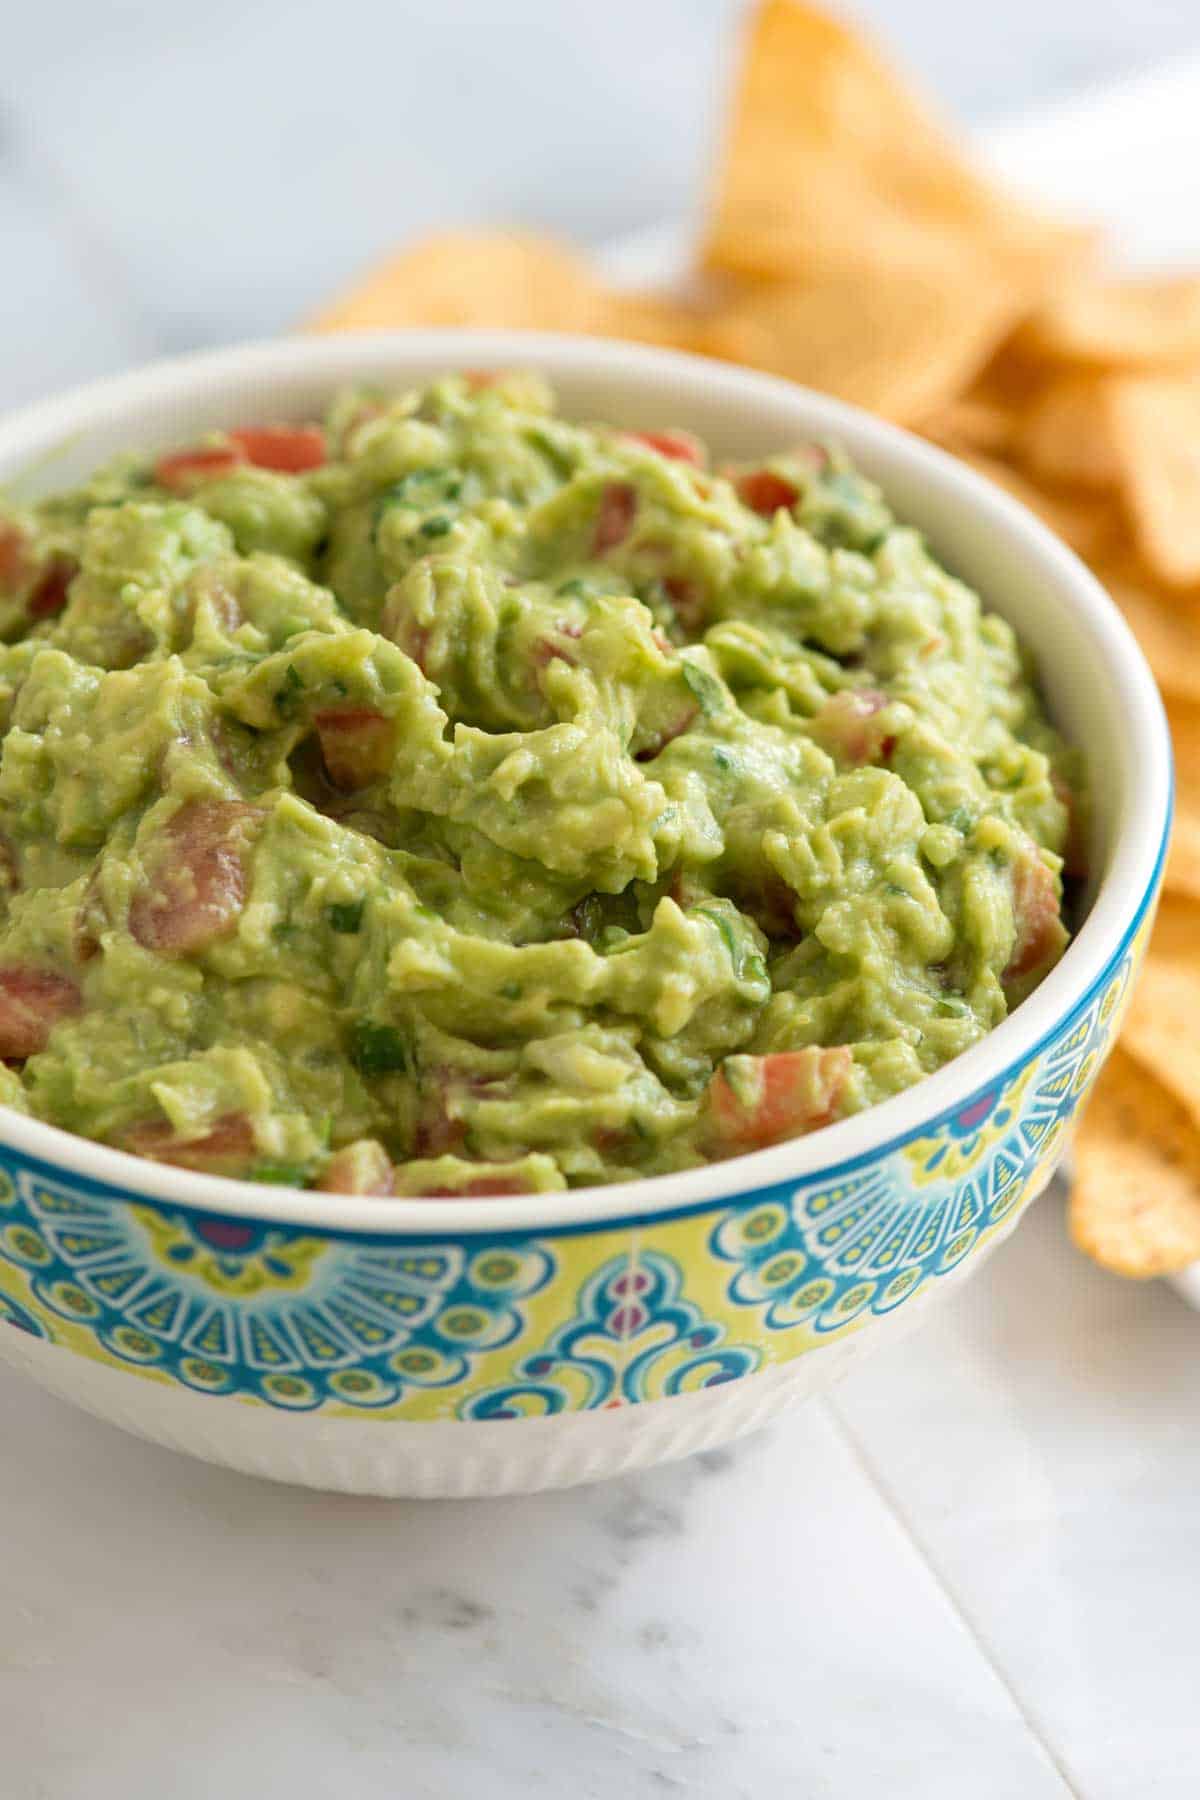 Best Ever Guacamole (Fresh, Easy & Authentic)